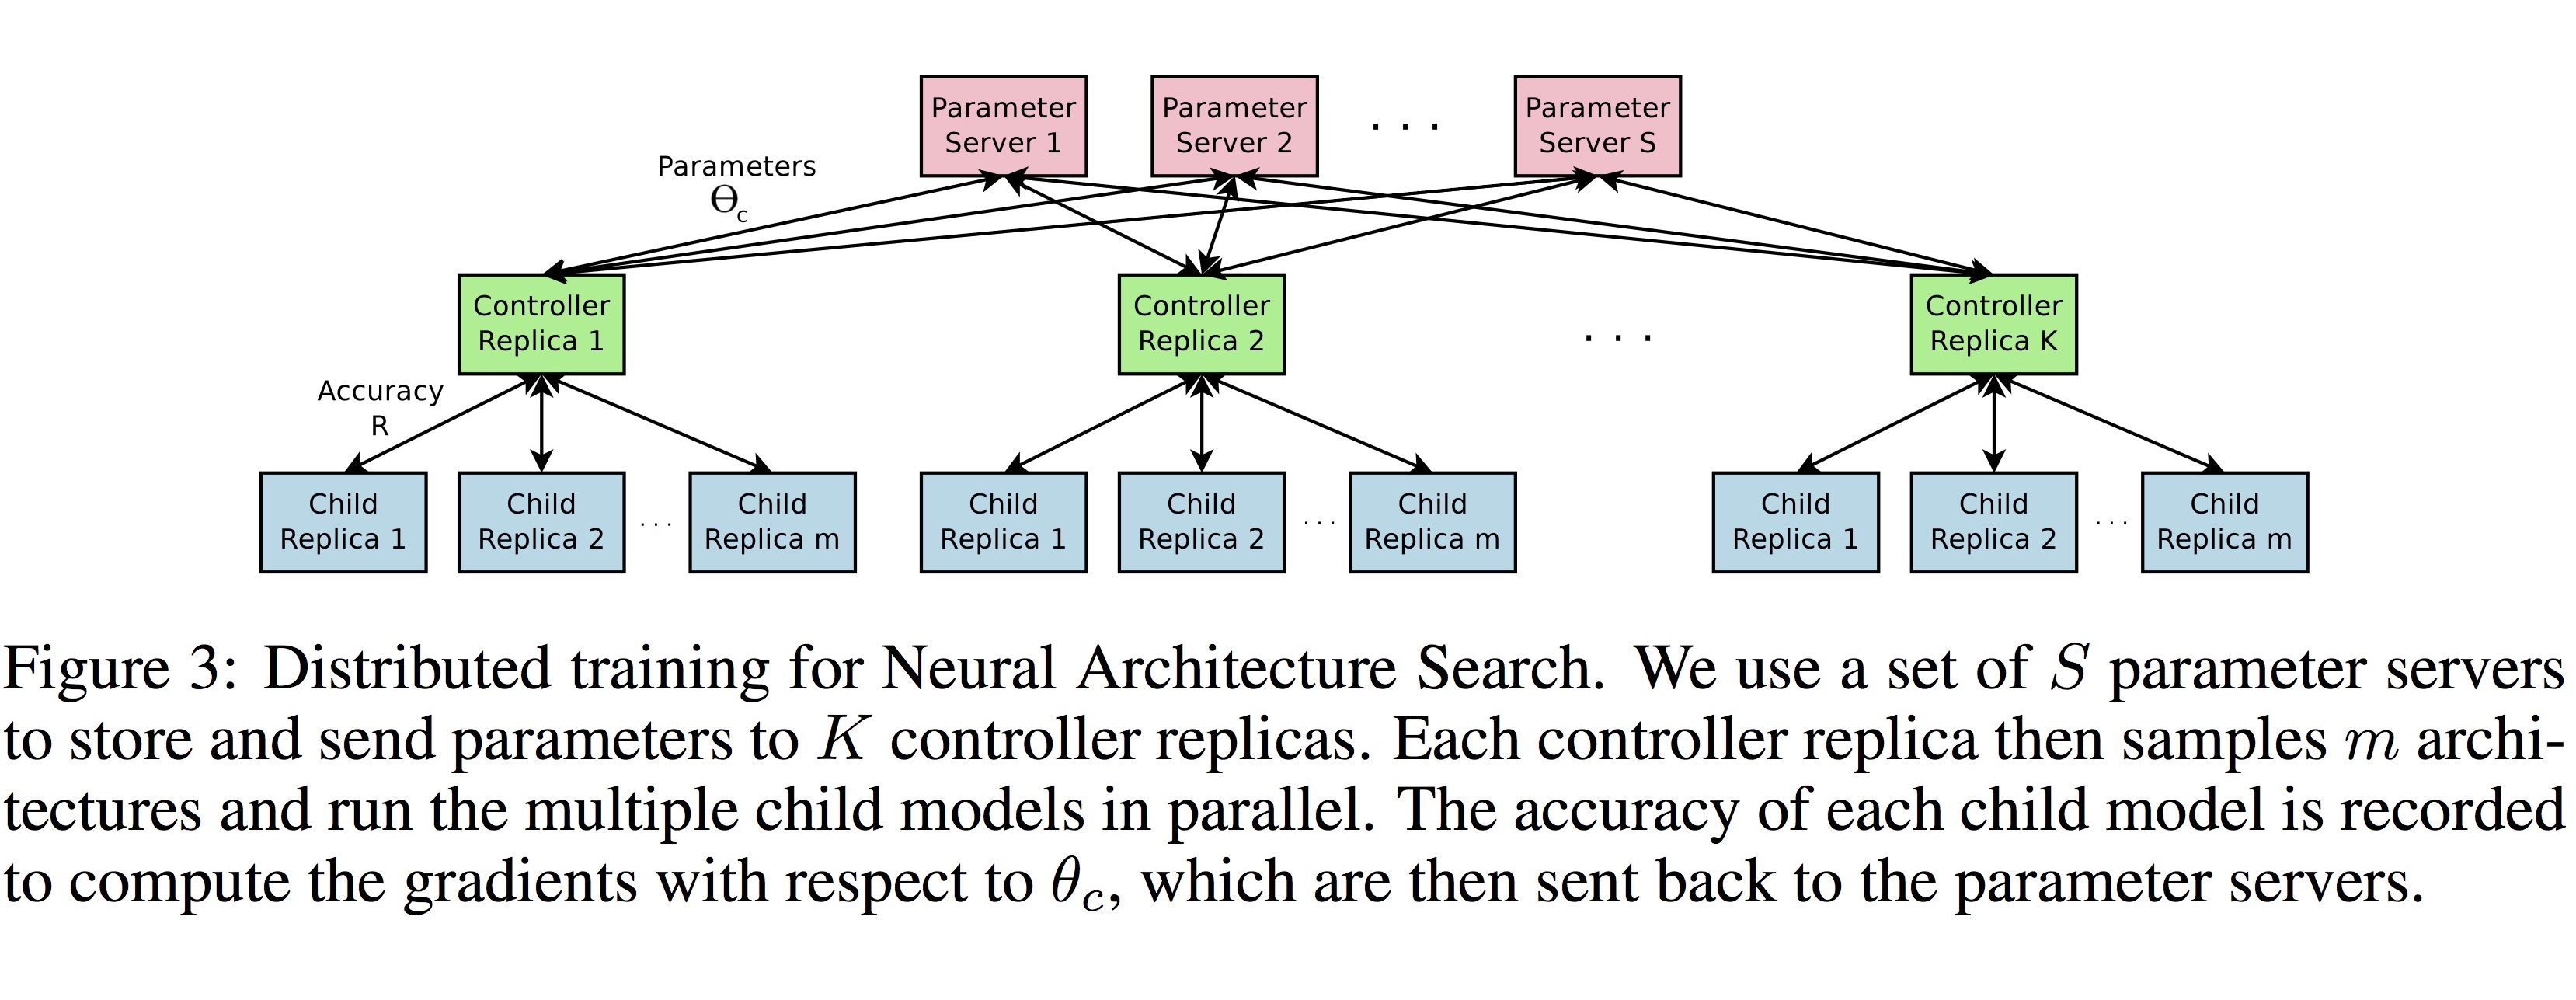 Neural Architecture Search with Reinforcement Learning · Pull Requests